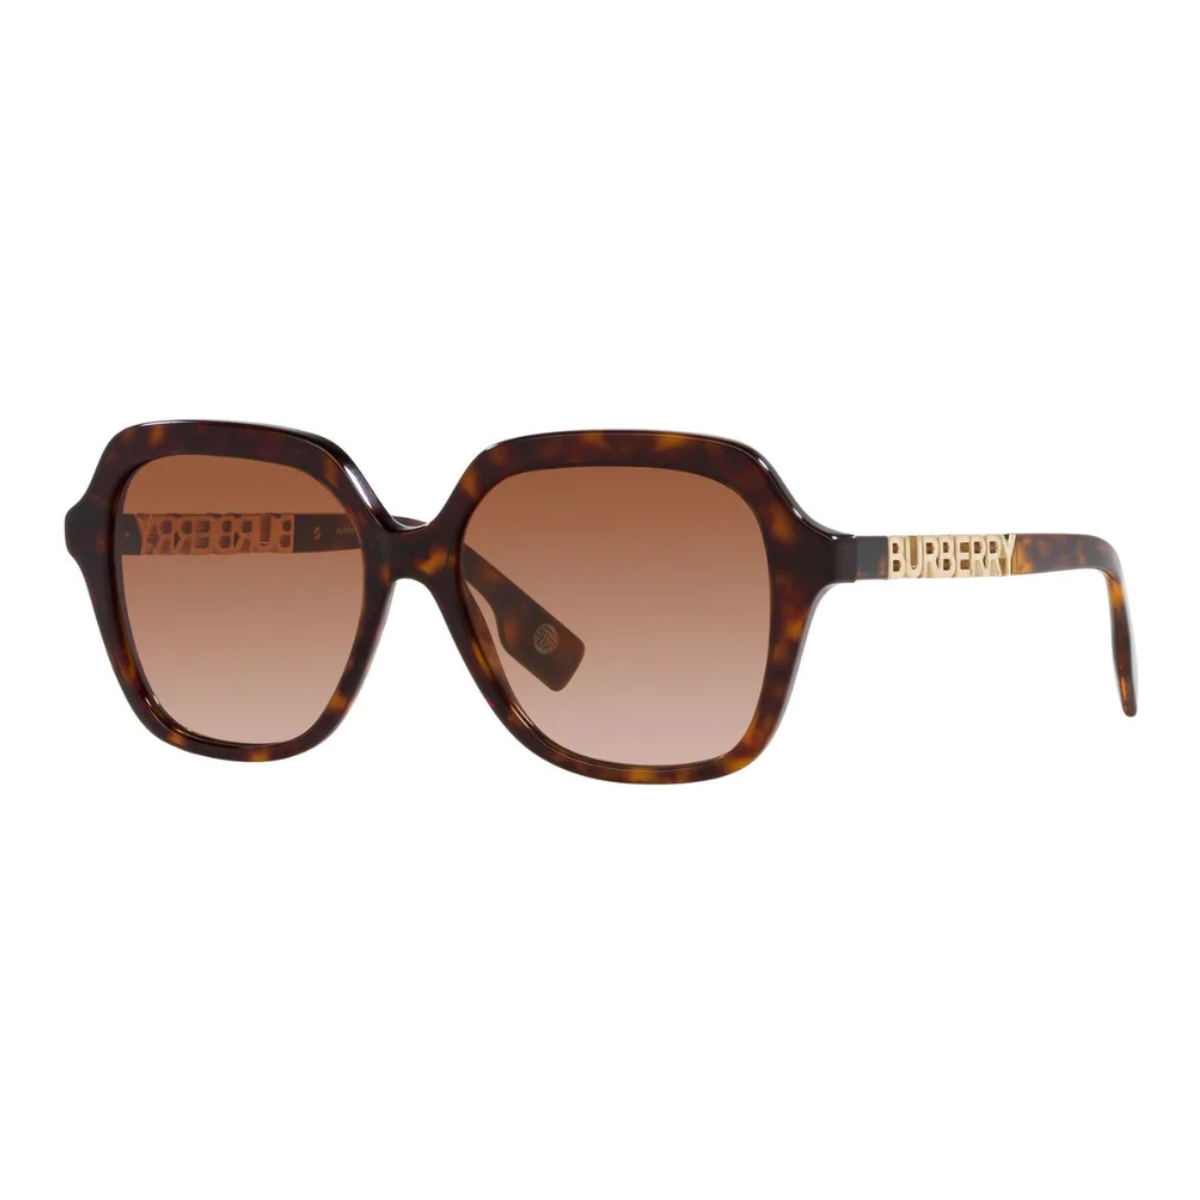 "Luxury Burberry women's sunglasses 4389 3002/13 displayed on a stylish background at Optorium."